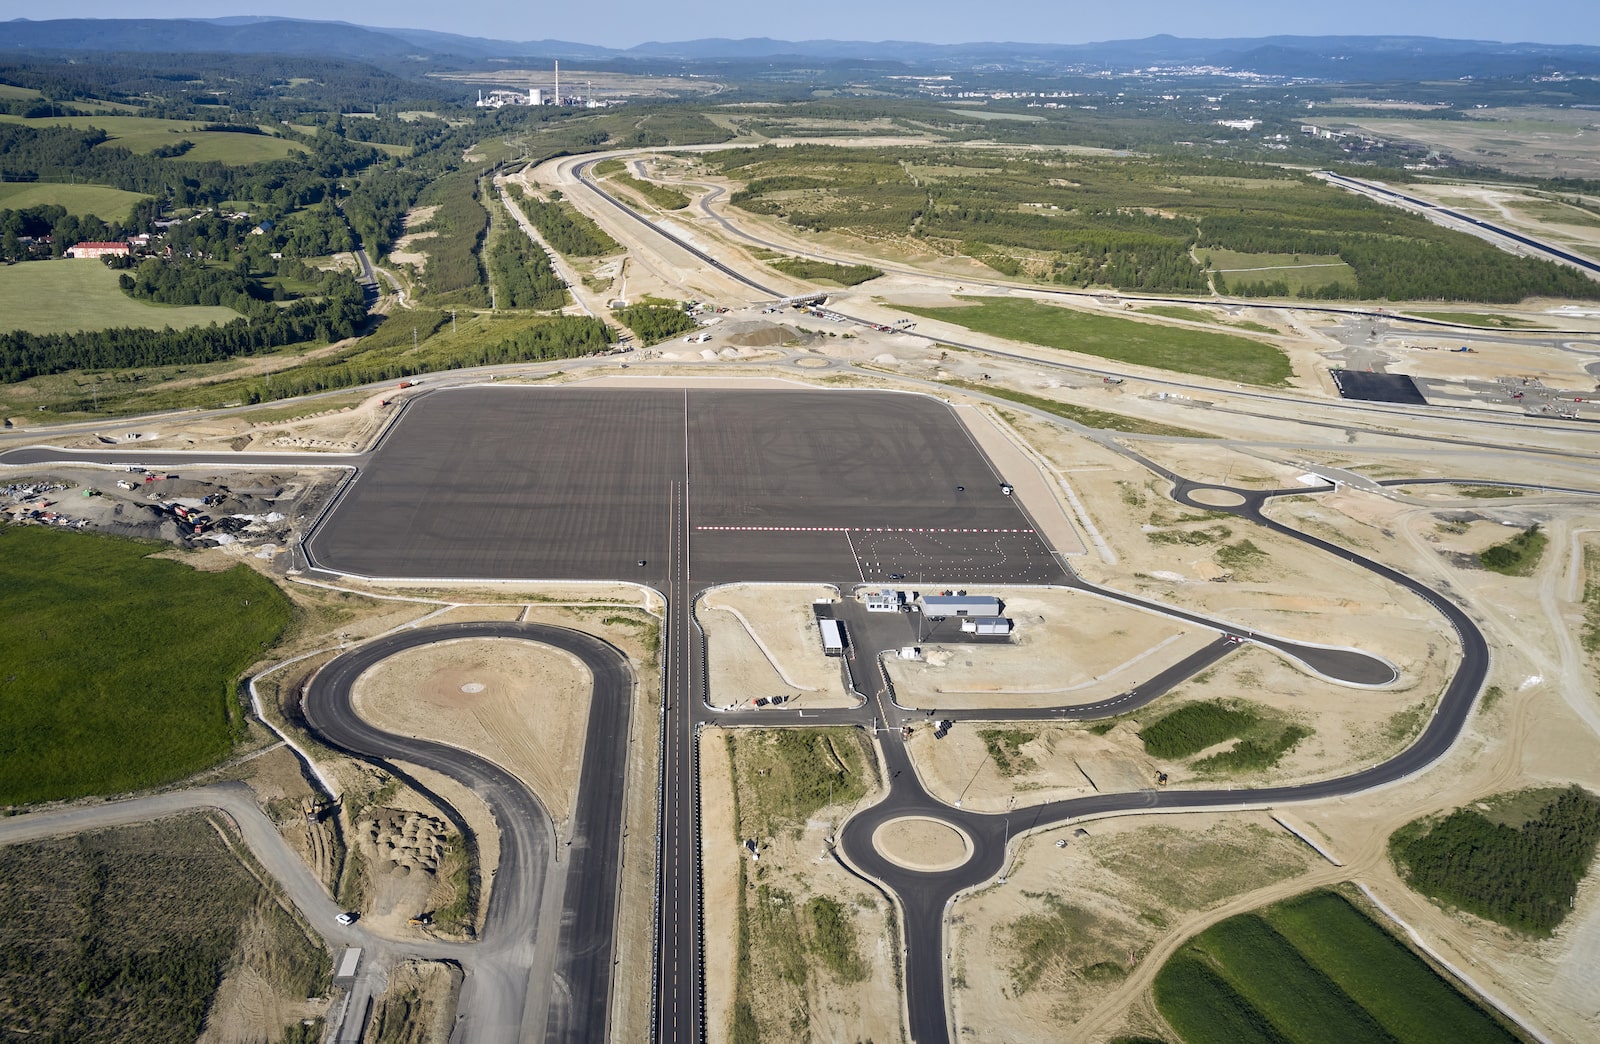 BMW Launches New 600-Hectare Site for Testing Automated Driving & Parking Tech